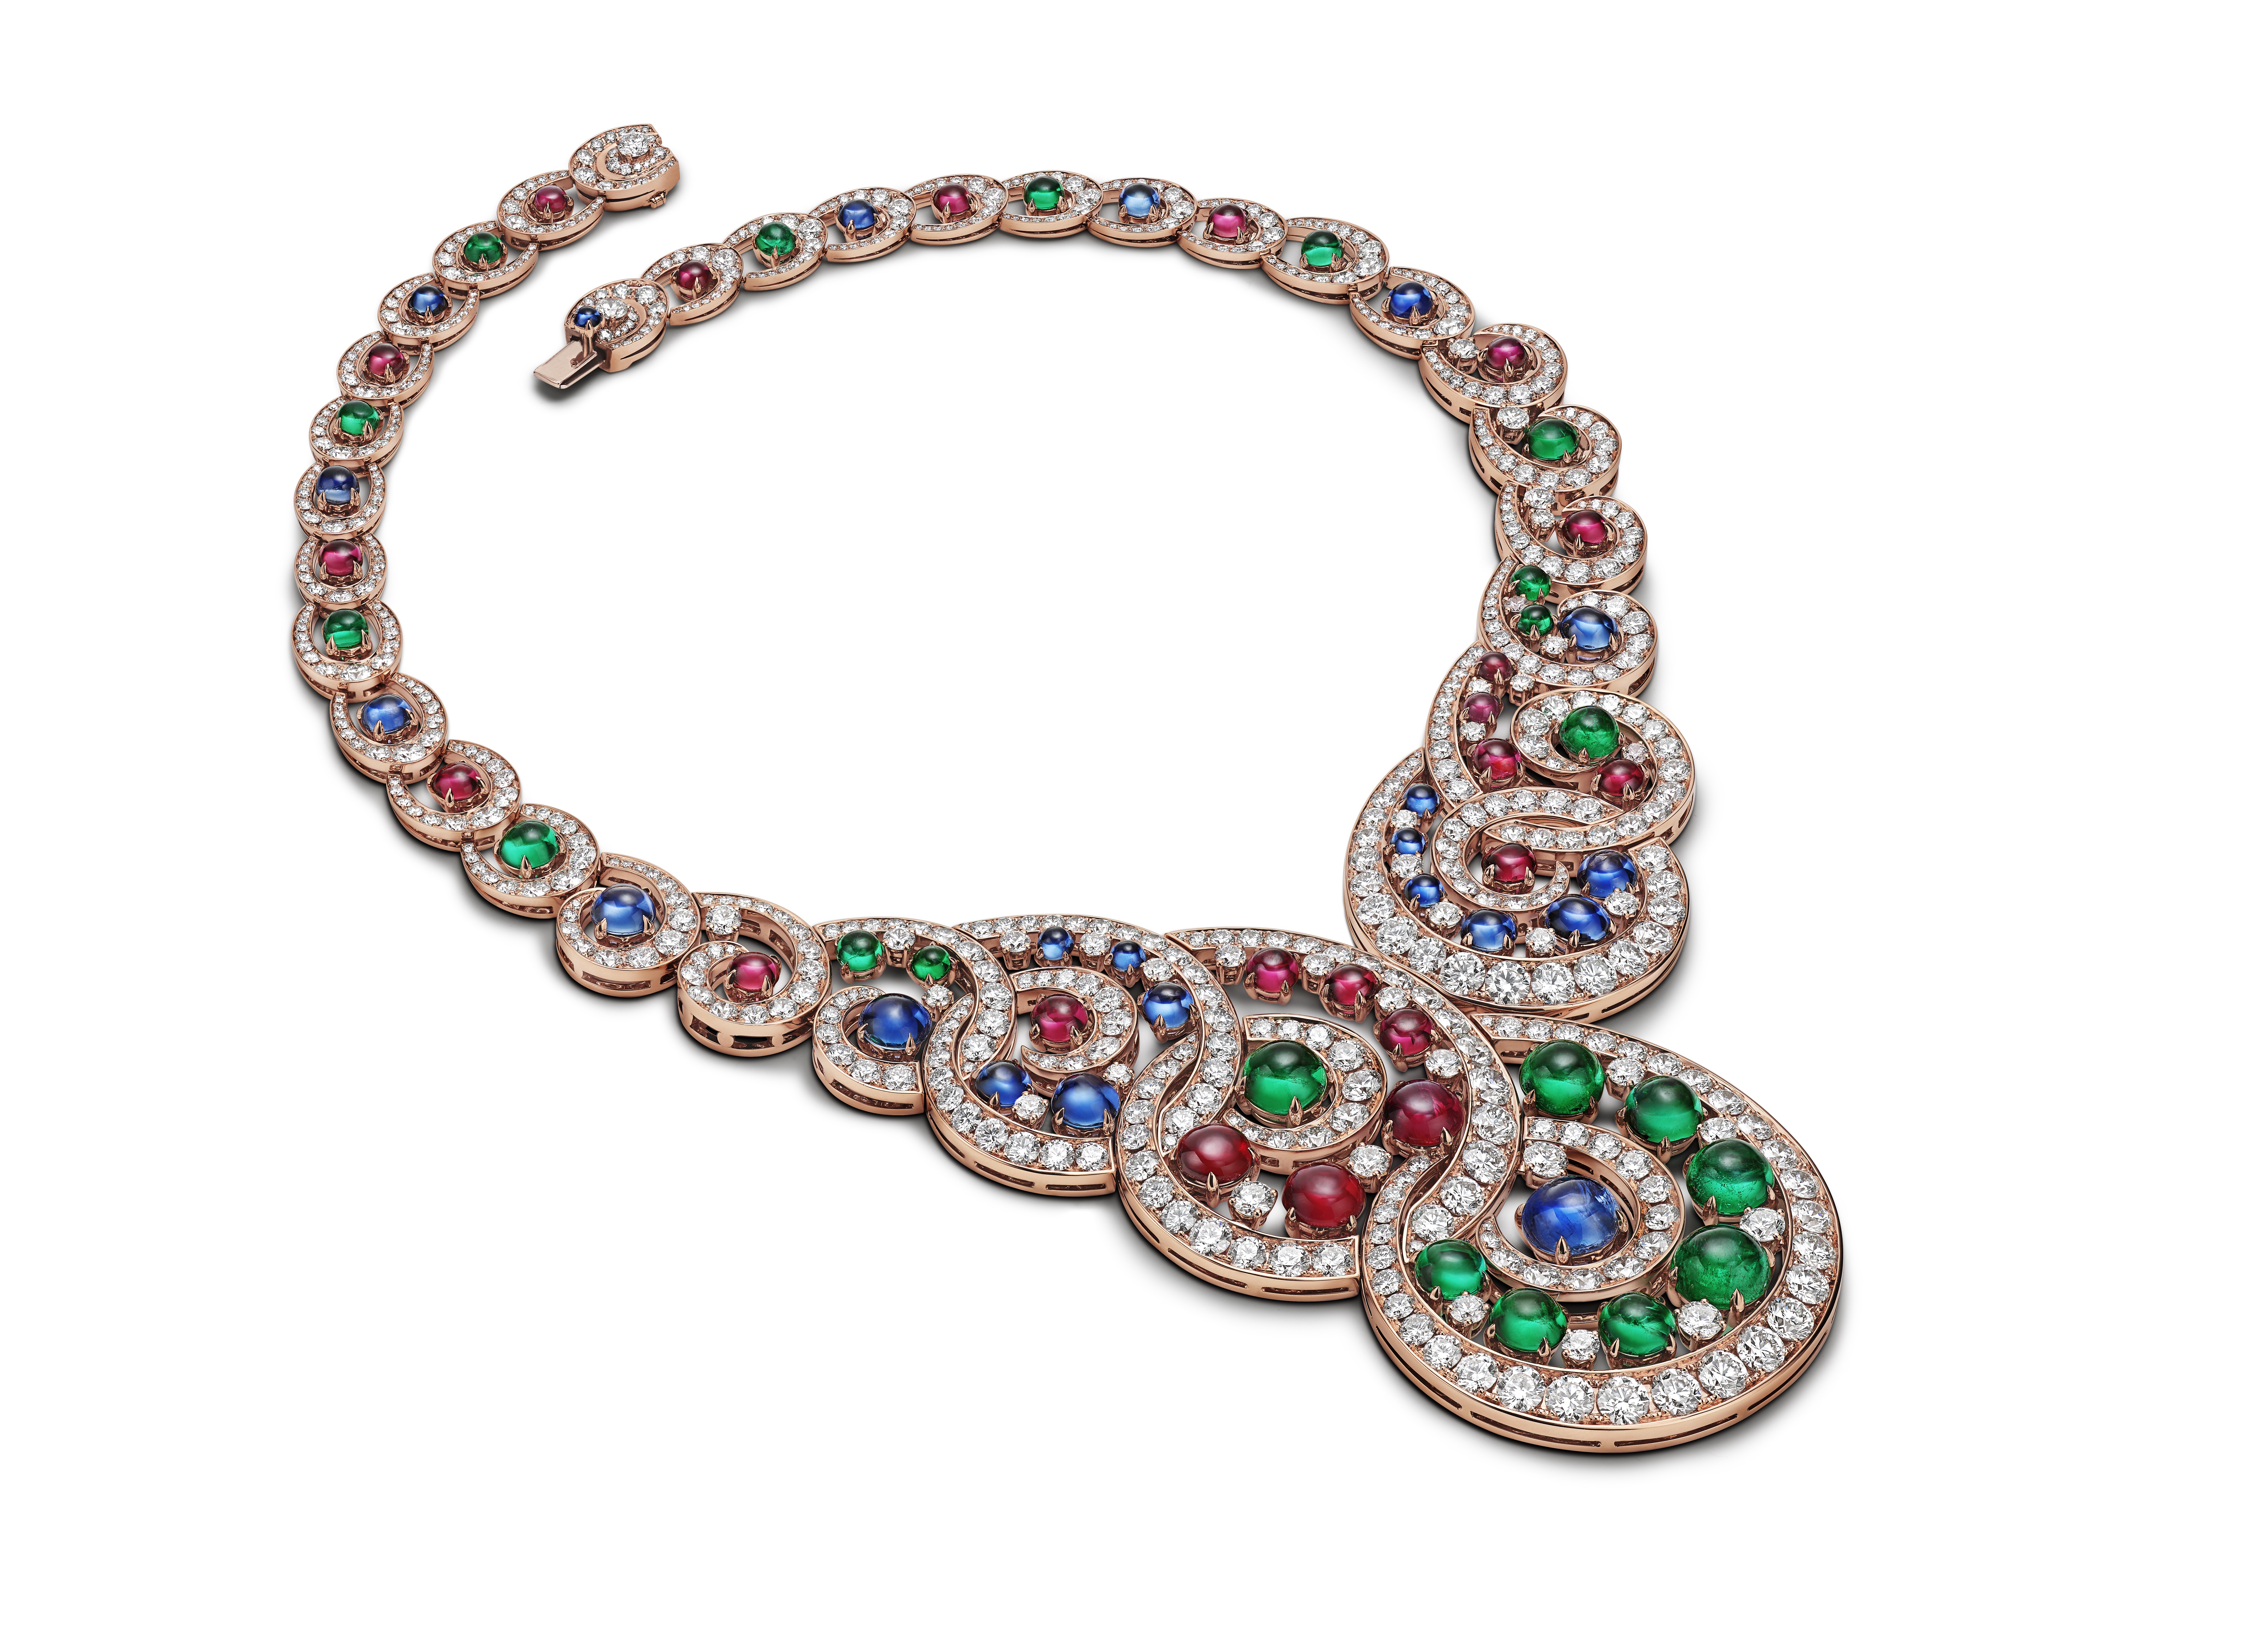 The Art of Craft: How a New Bulgari Necklace Pays Tribute to the Bold  Spirit of 17th-Century Painter Artemisia Gentileschi